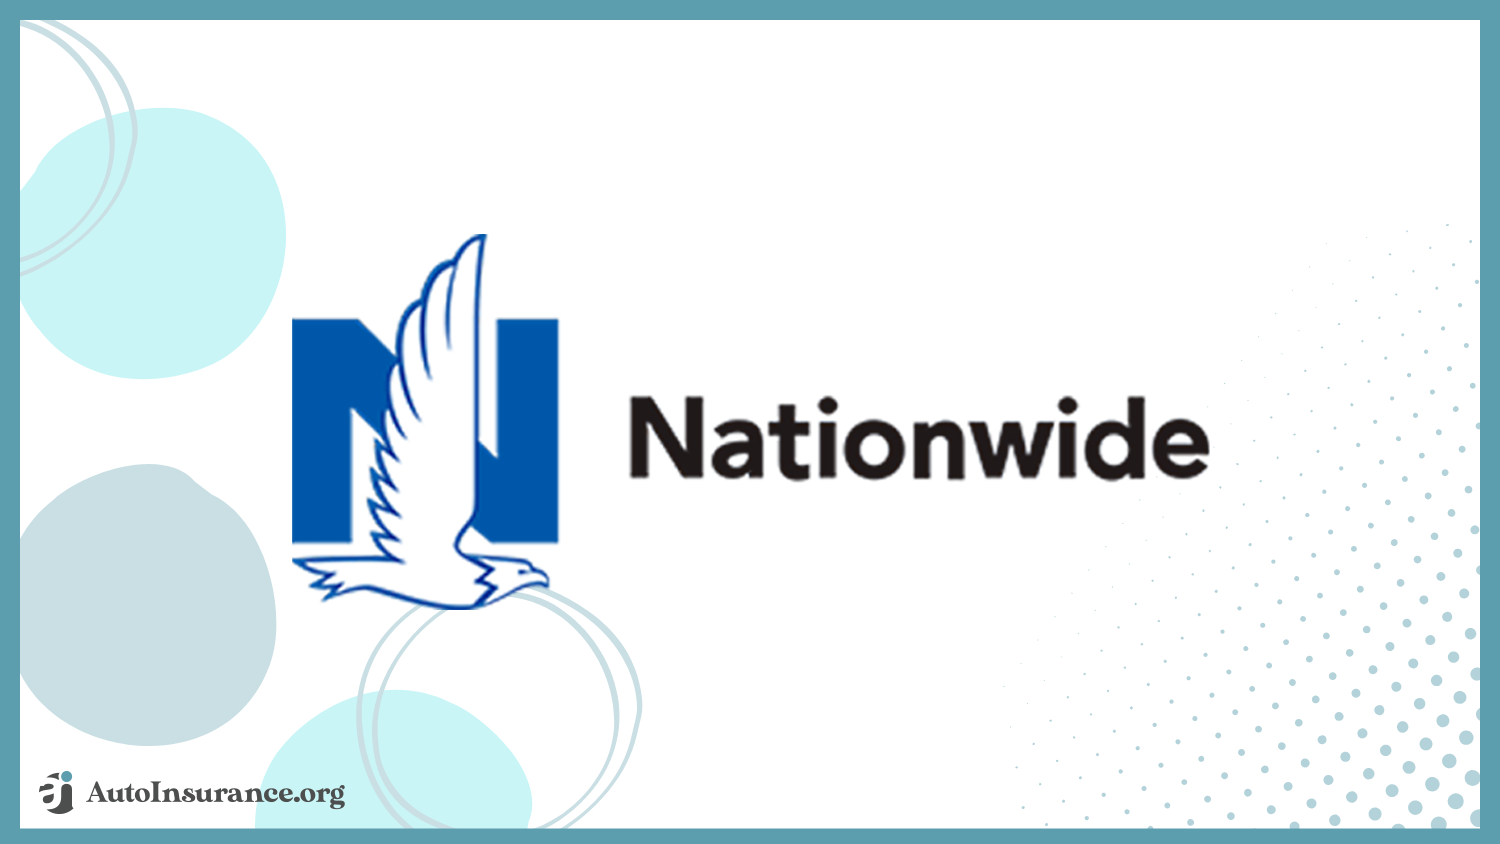 Nationwide: Best Auto Insurance for Drivers with Dementia